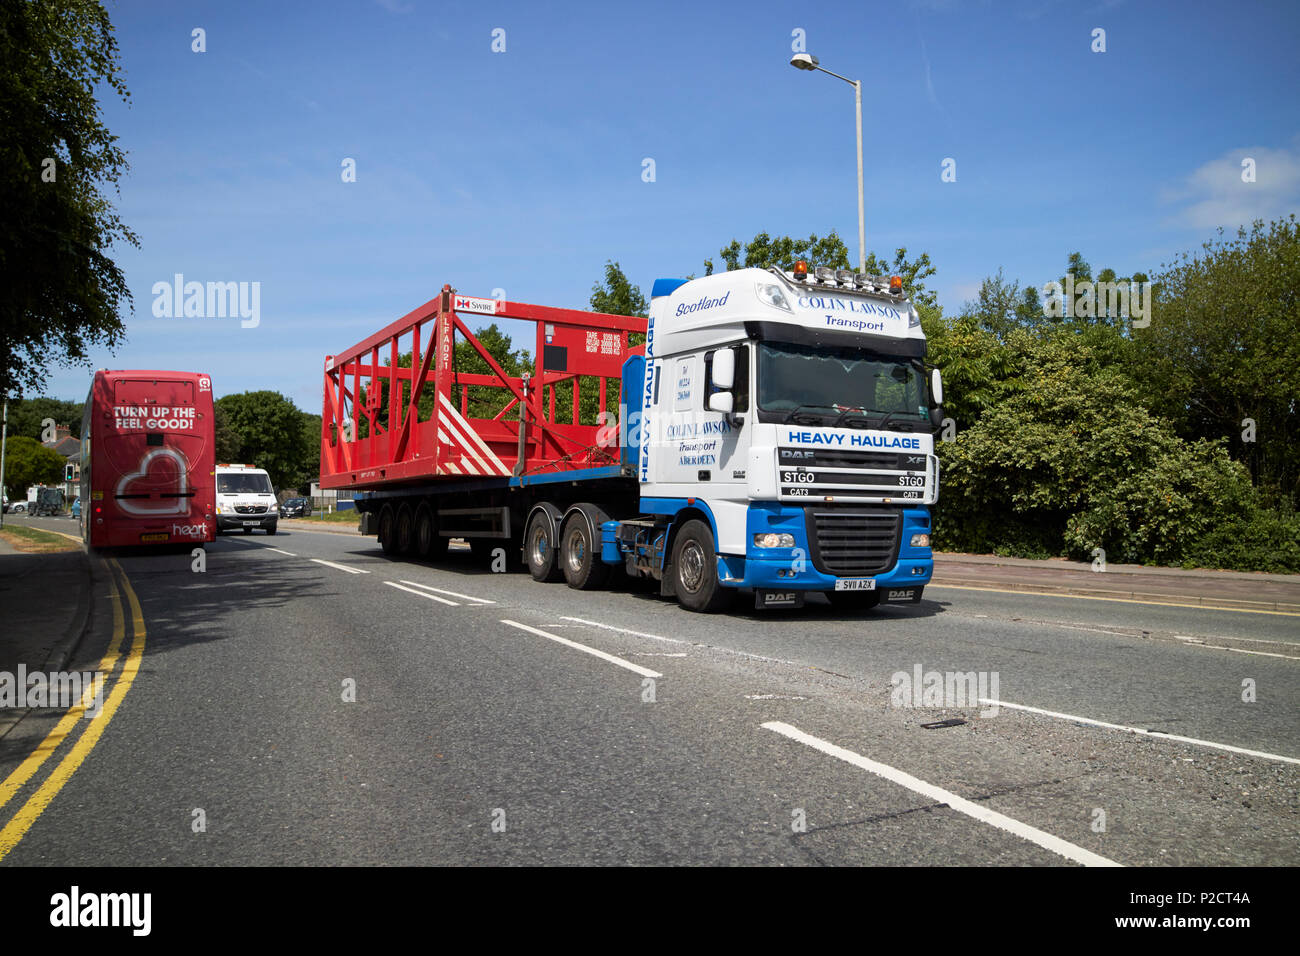 Heavy Haulage road truck transporting large metal structure wide load lancashire england uk Stock Photo